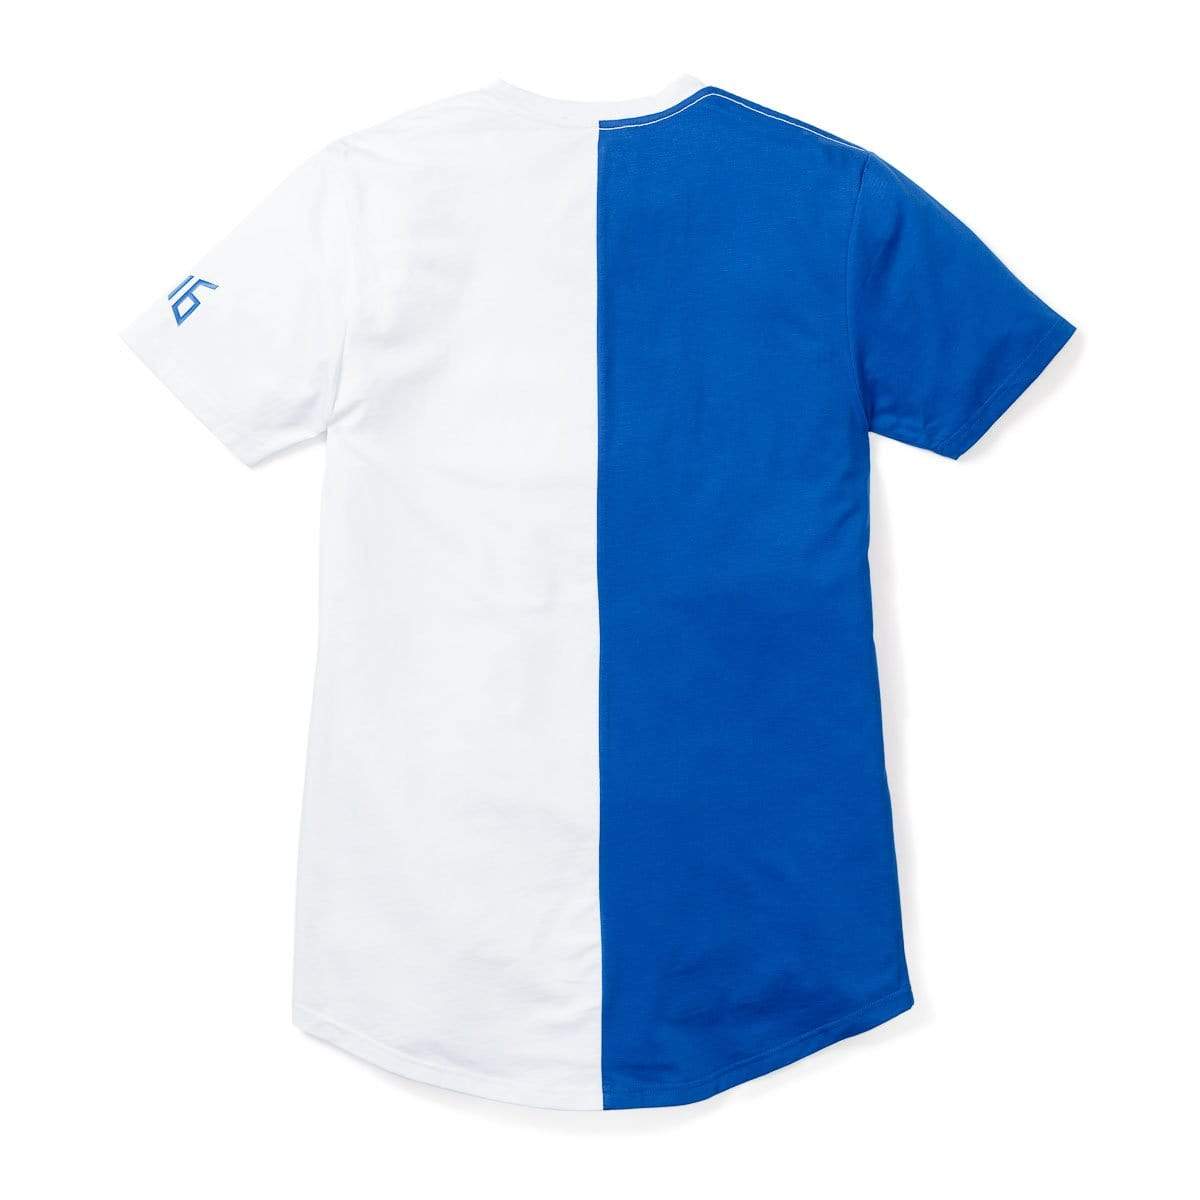 3:16 Collection Apparel Salvation Vertical Block Swoop Tee - Royal and White